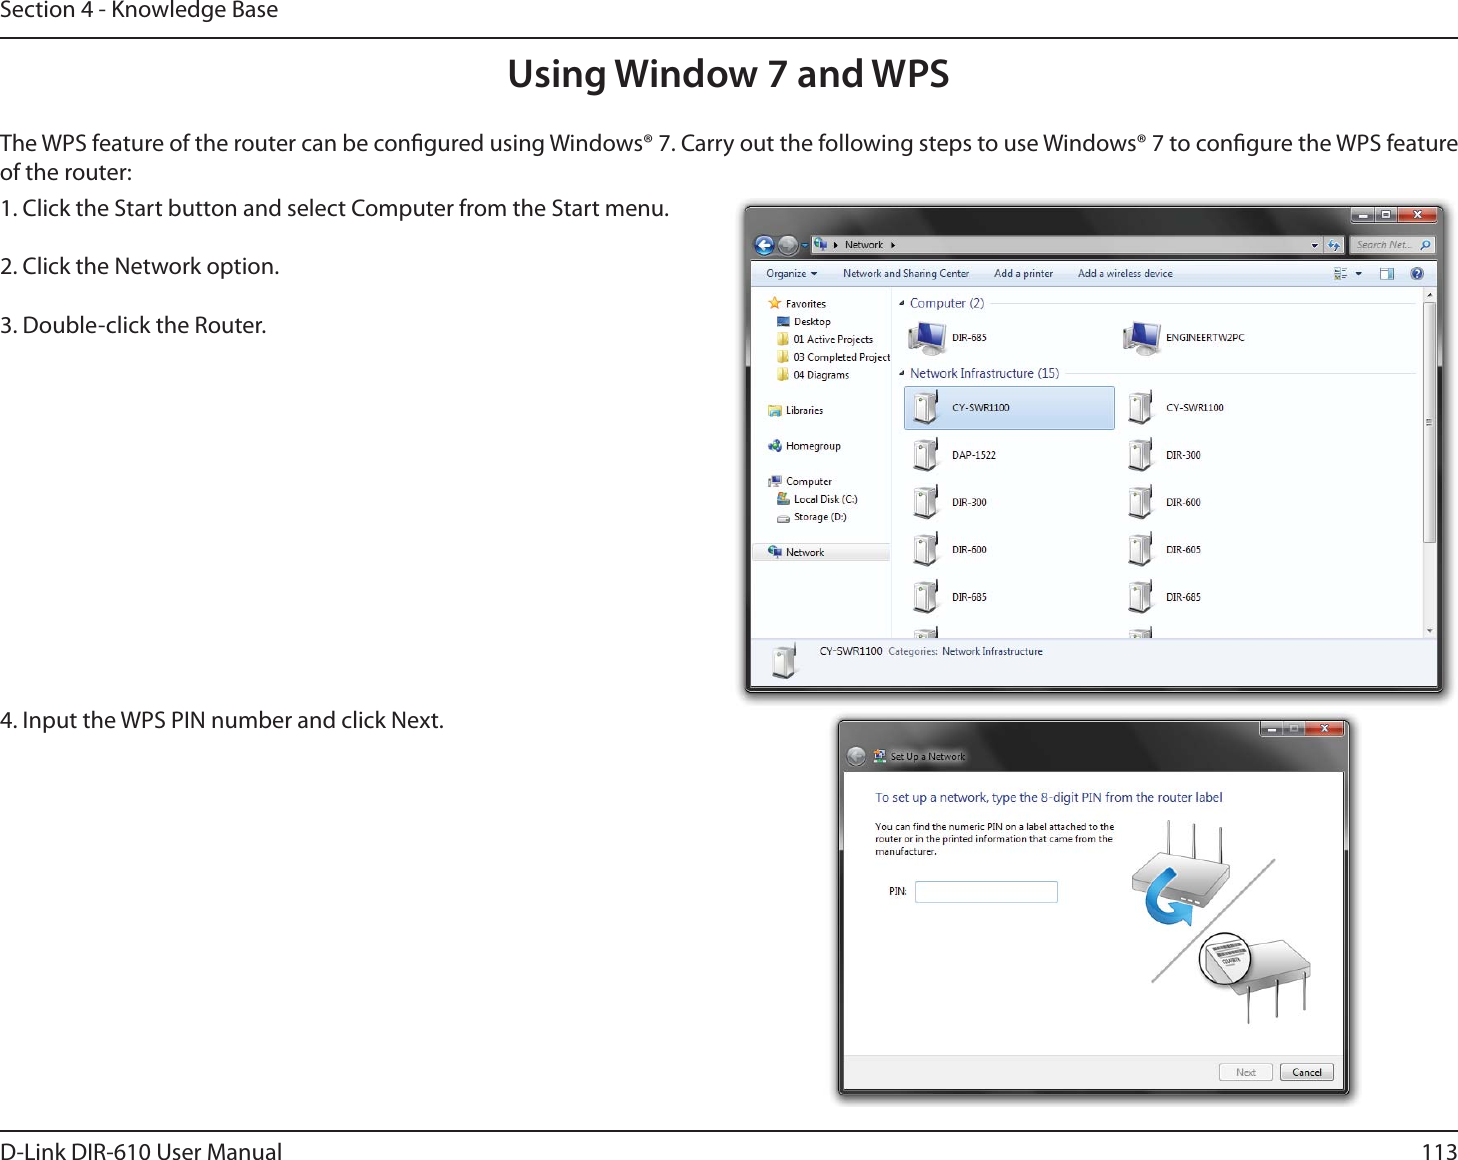 113D-Link DIR-610 User ManualSection 4 - Knowledge BaseUsing Window 7 and WPSThe WPS feature of the router can be congured using Windows® 7. Carry out the following steps to use Windows® 7 to congure the WPS feature of the router:1. Click the Start button and select Computer from the Start menu.2. Click the Network option.3. Double-click the Router.4. Input the WPS PIN number and click Next.